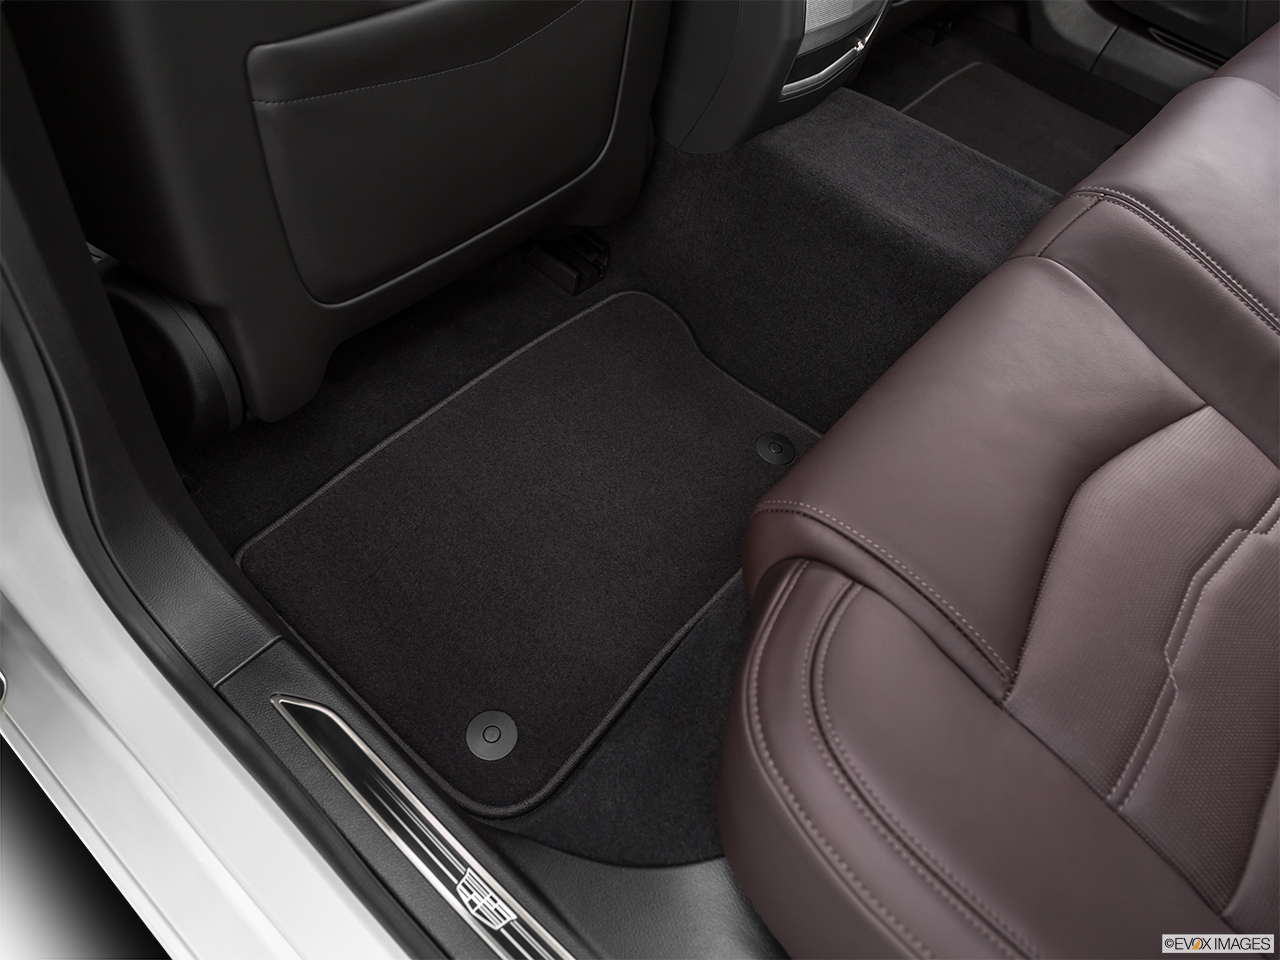 2019 Cadillac CT6-V Base Rear driver's side floor mat. Mid-seat level from outside looking in. 